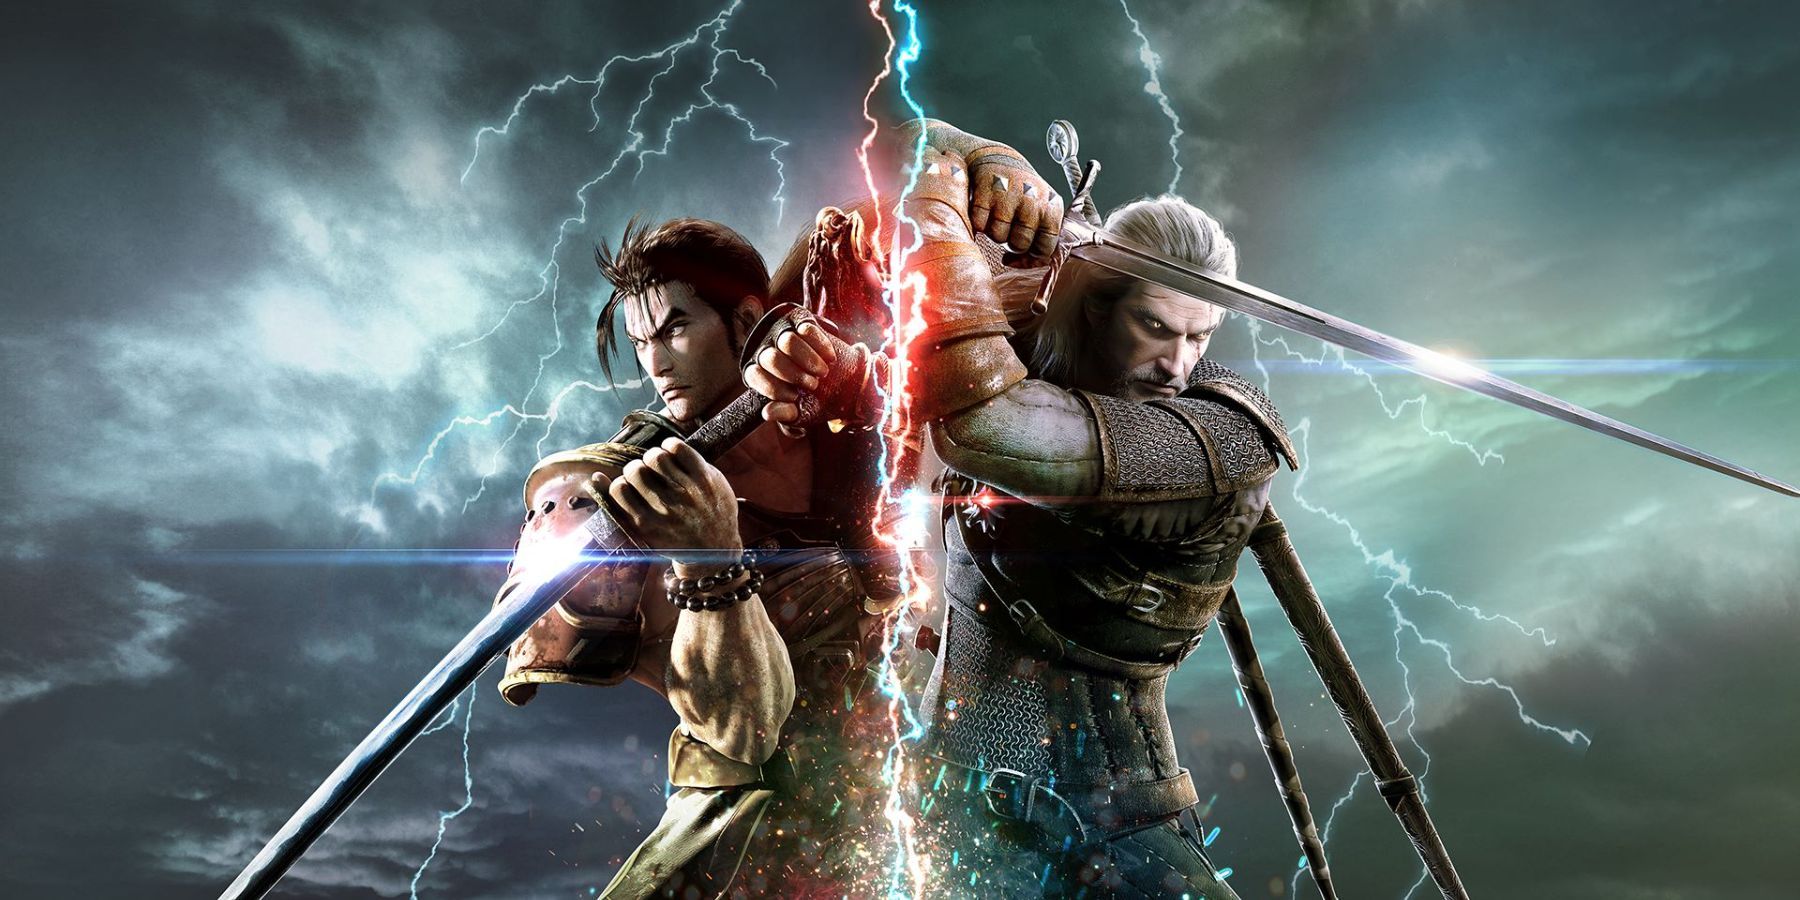 Soulcalibur 6 Set The Stage For The Series' Best Entry 5 Years Ago